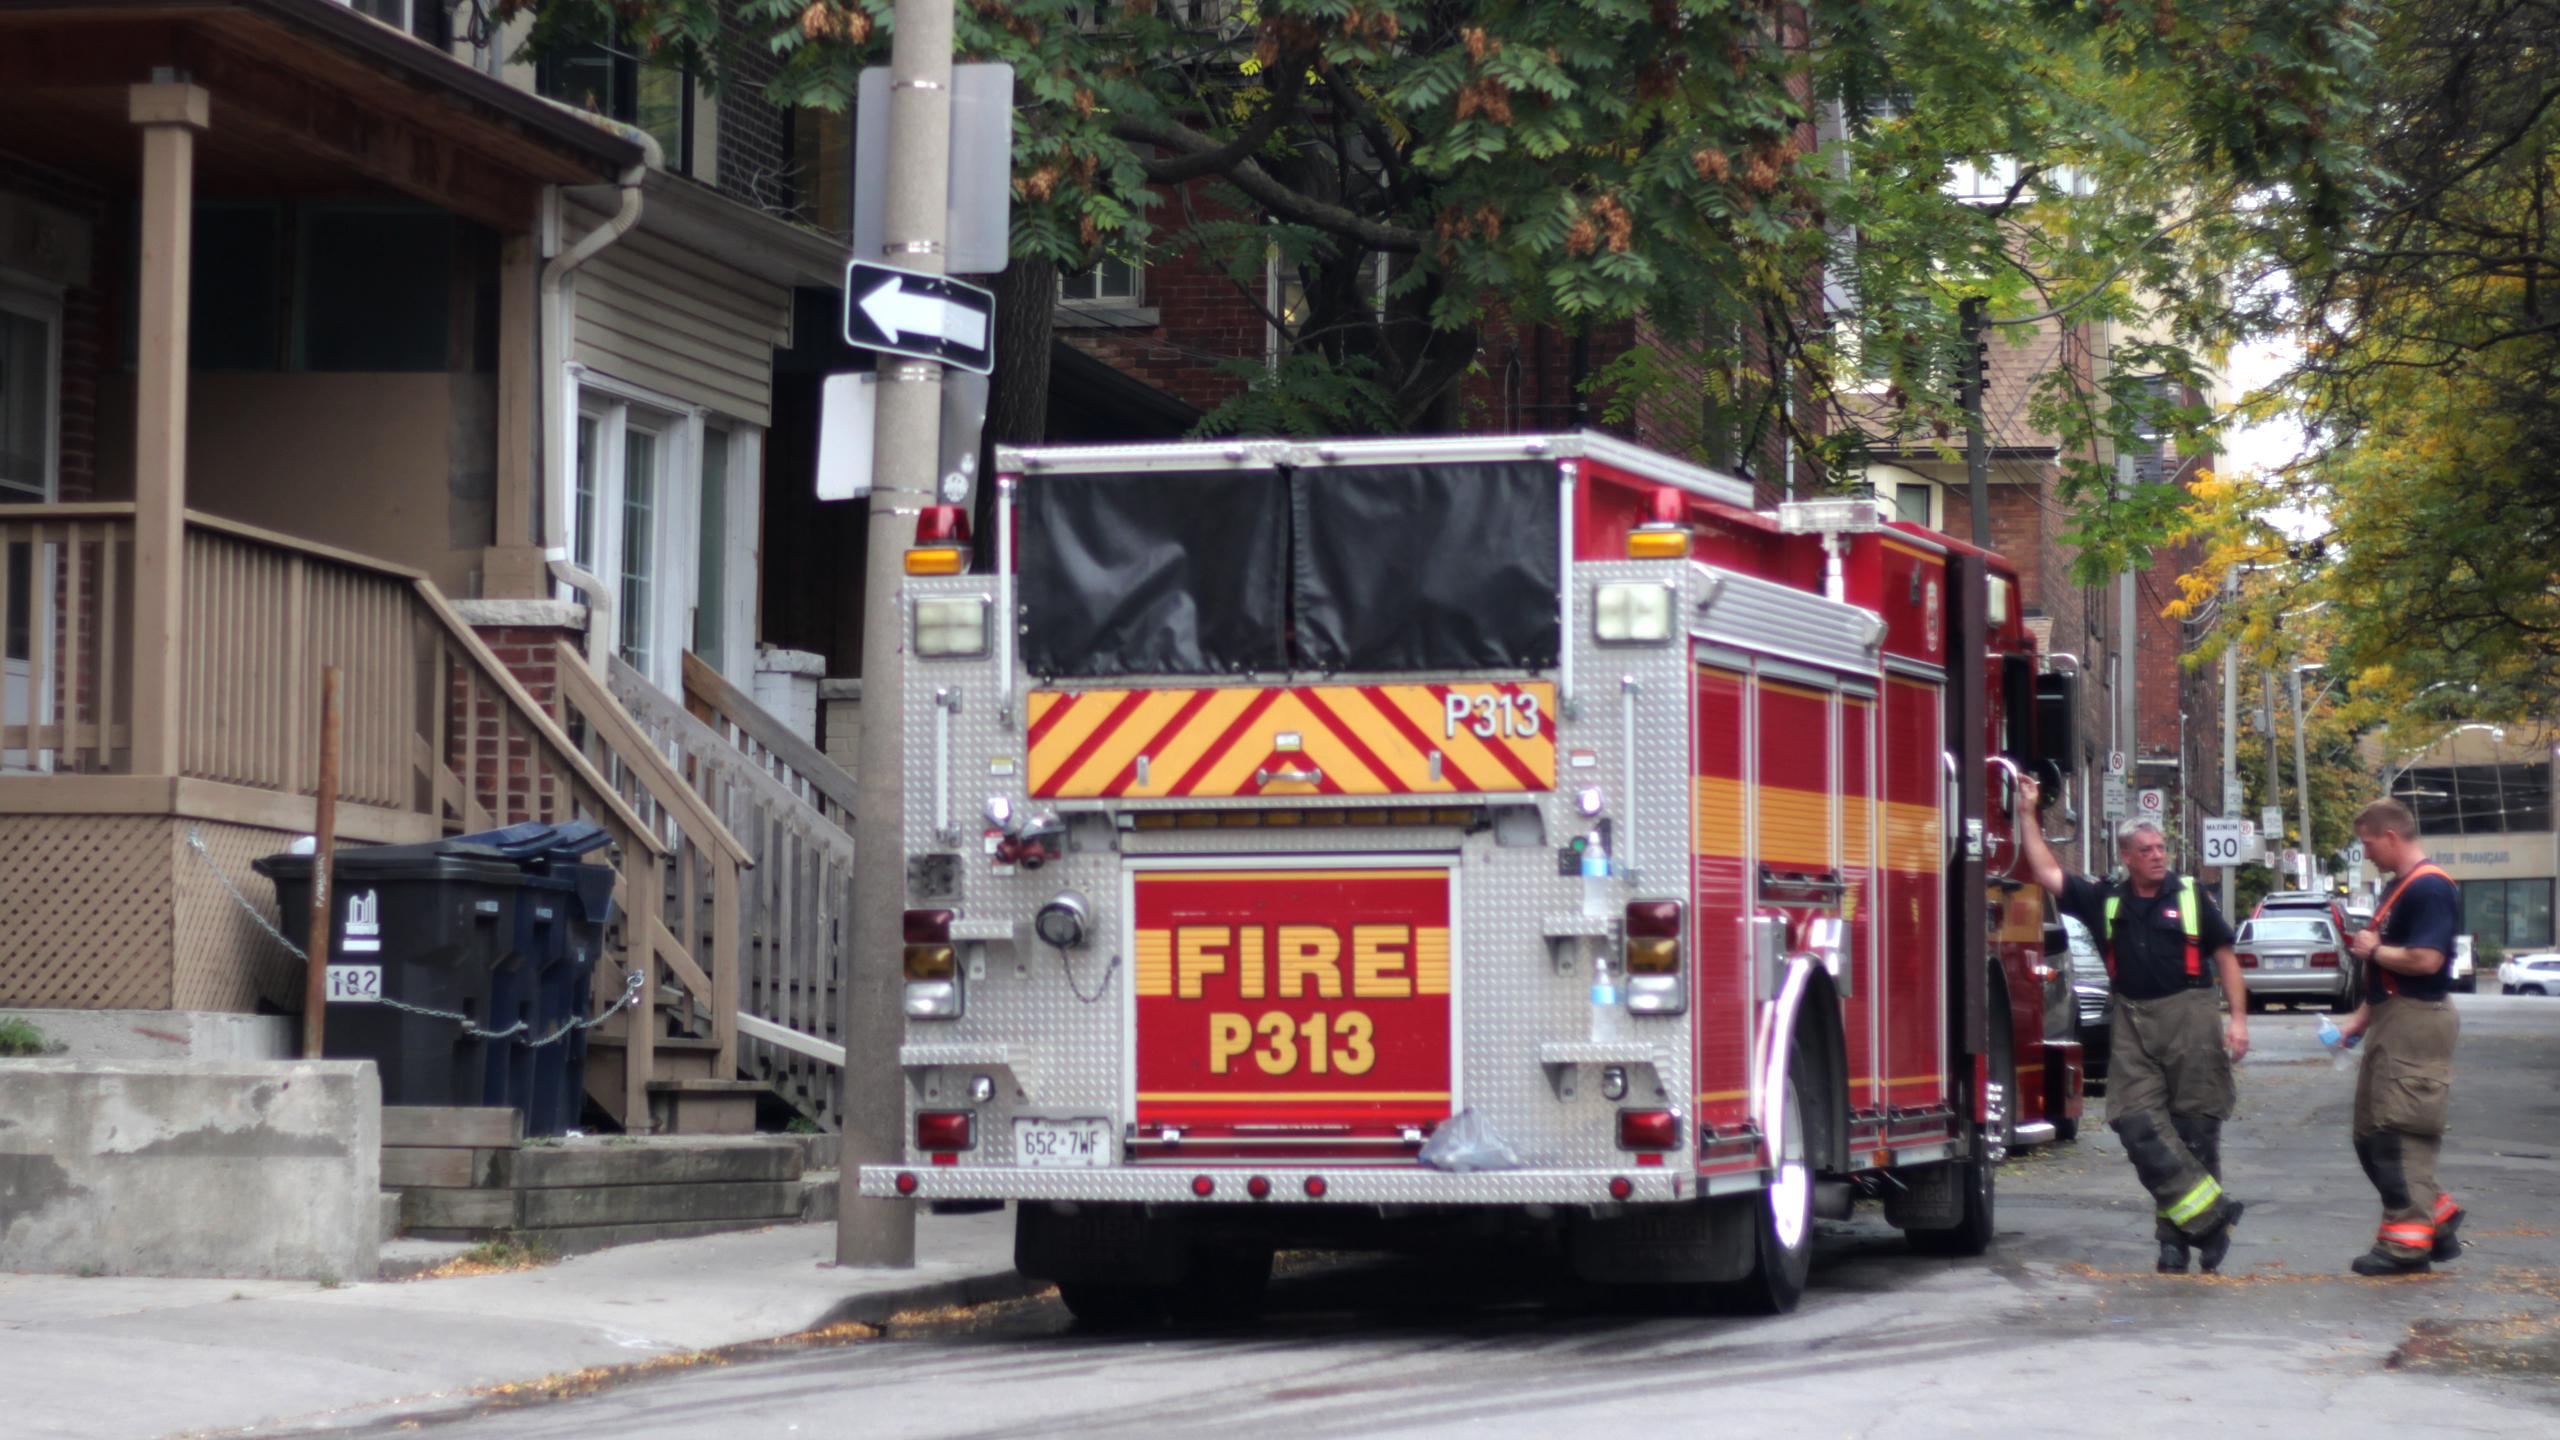 Toronto Fire Services responded to the scene at 189 Mutual St. PHOTO SARAH KRICHEL